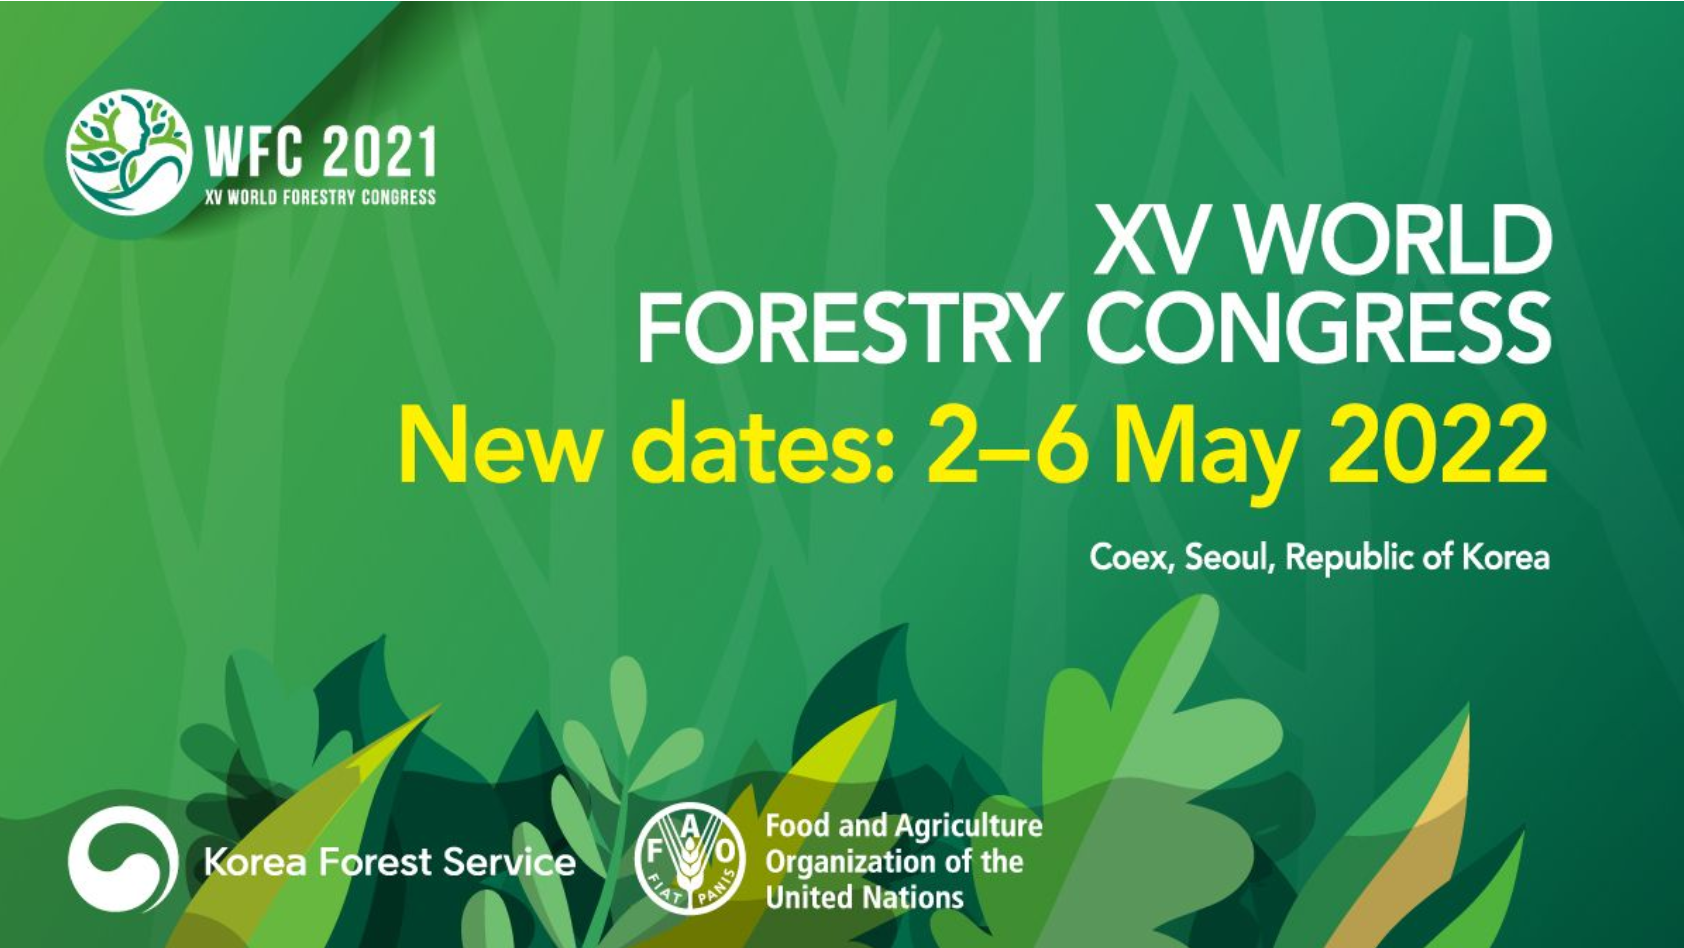 XV World Forestry Congress in Seoul, May 2-6, 2022